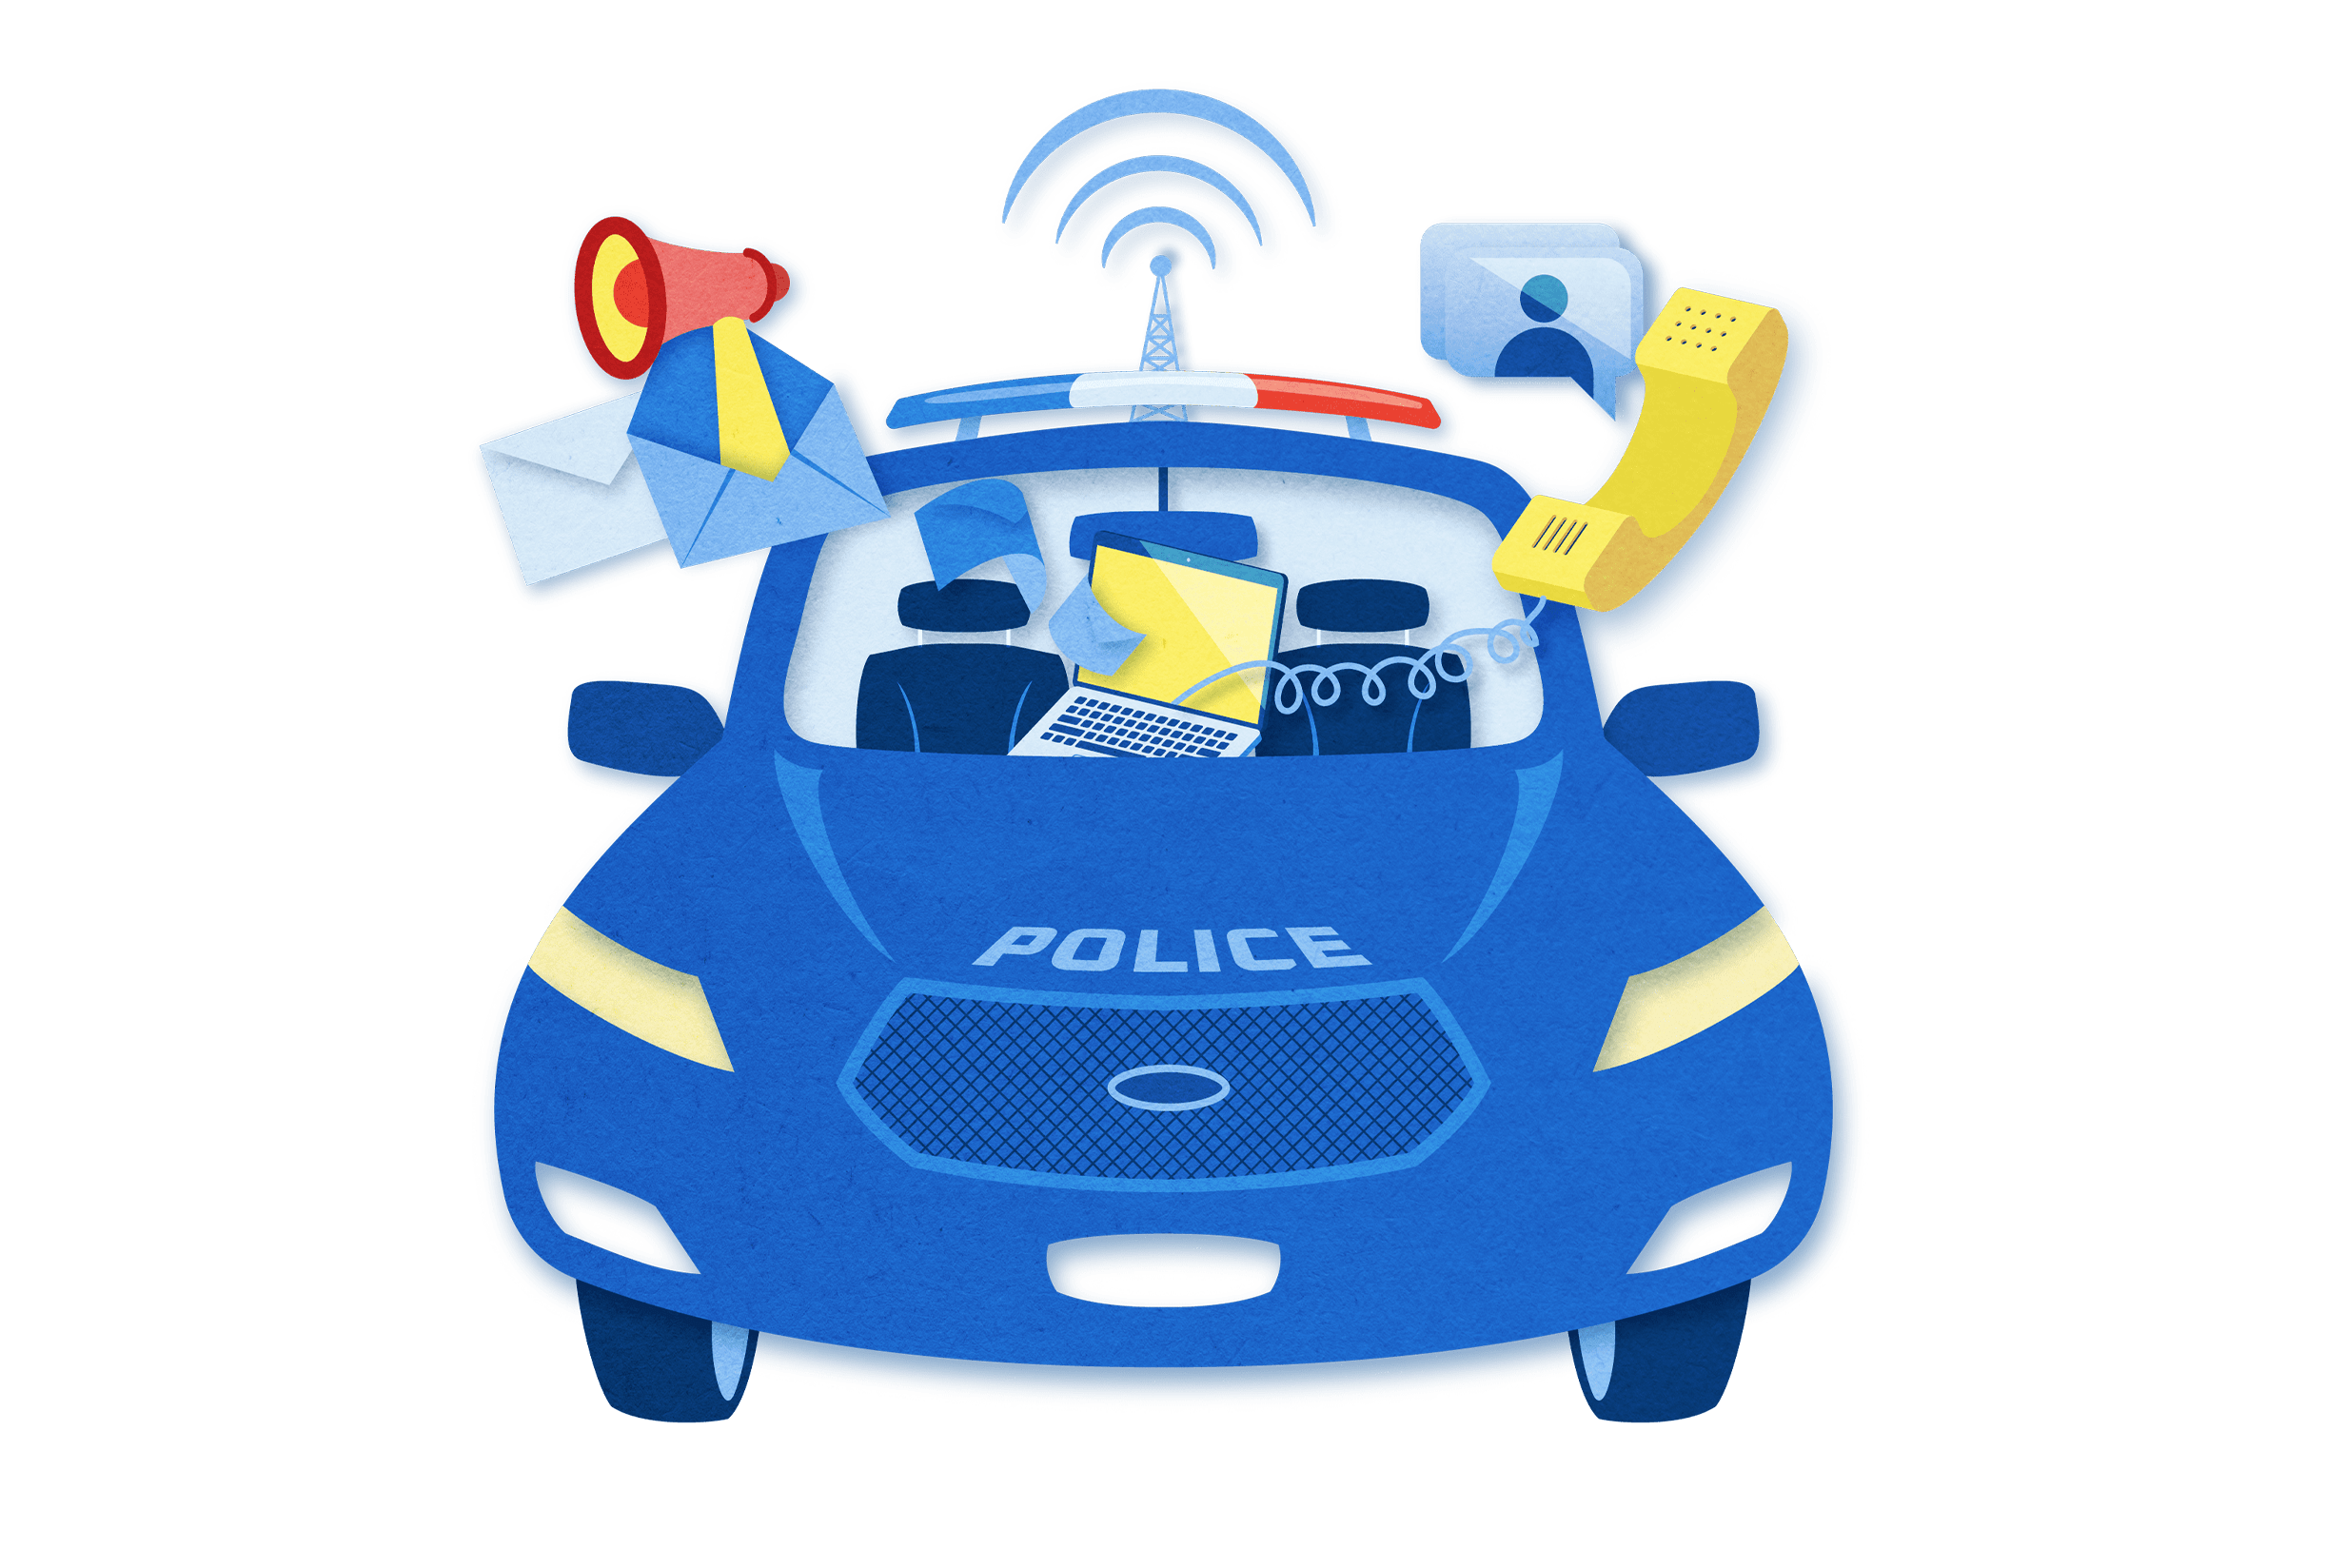 voice solutions for police station